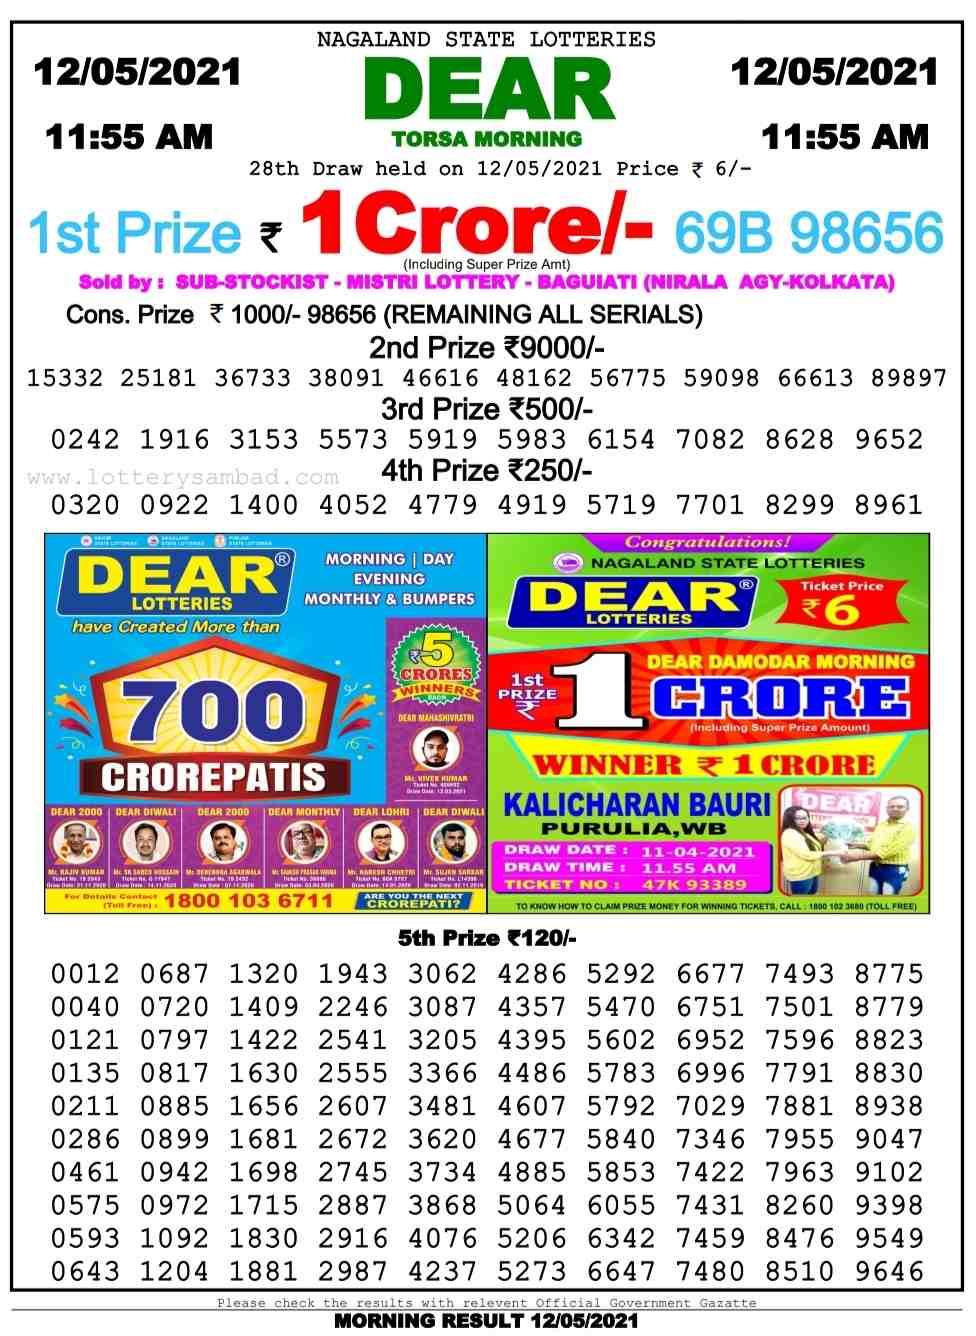 Dear Daily Lottery Result 11.55AM 12 May 2021